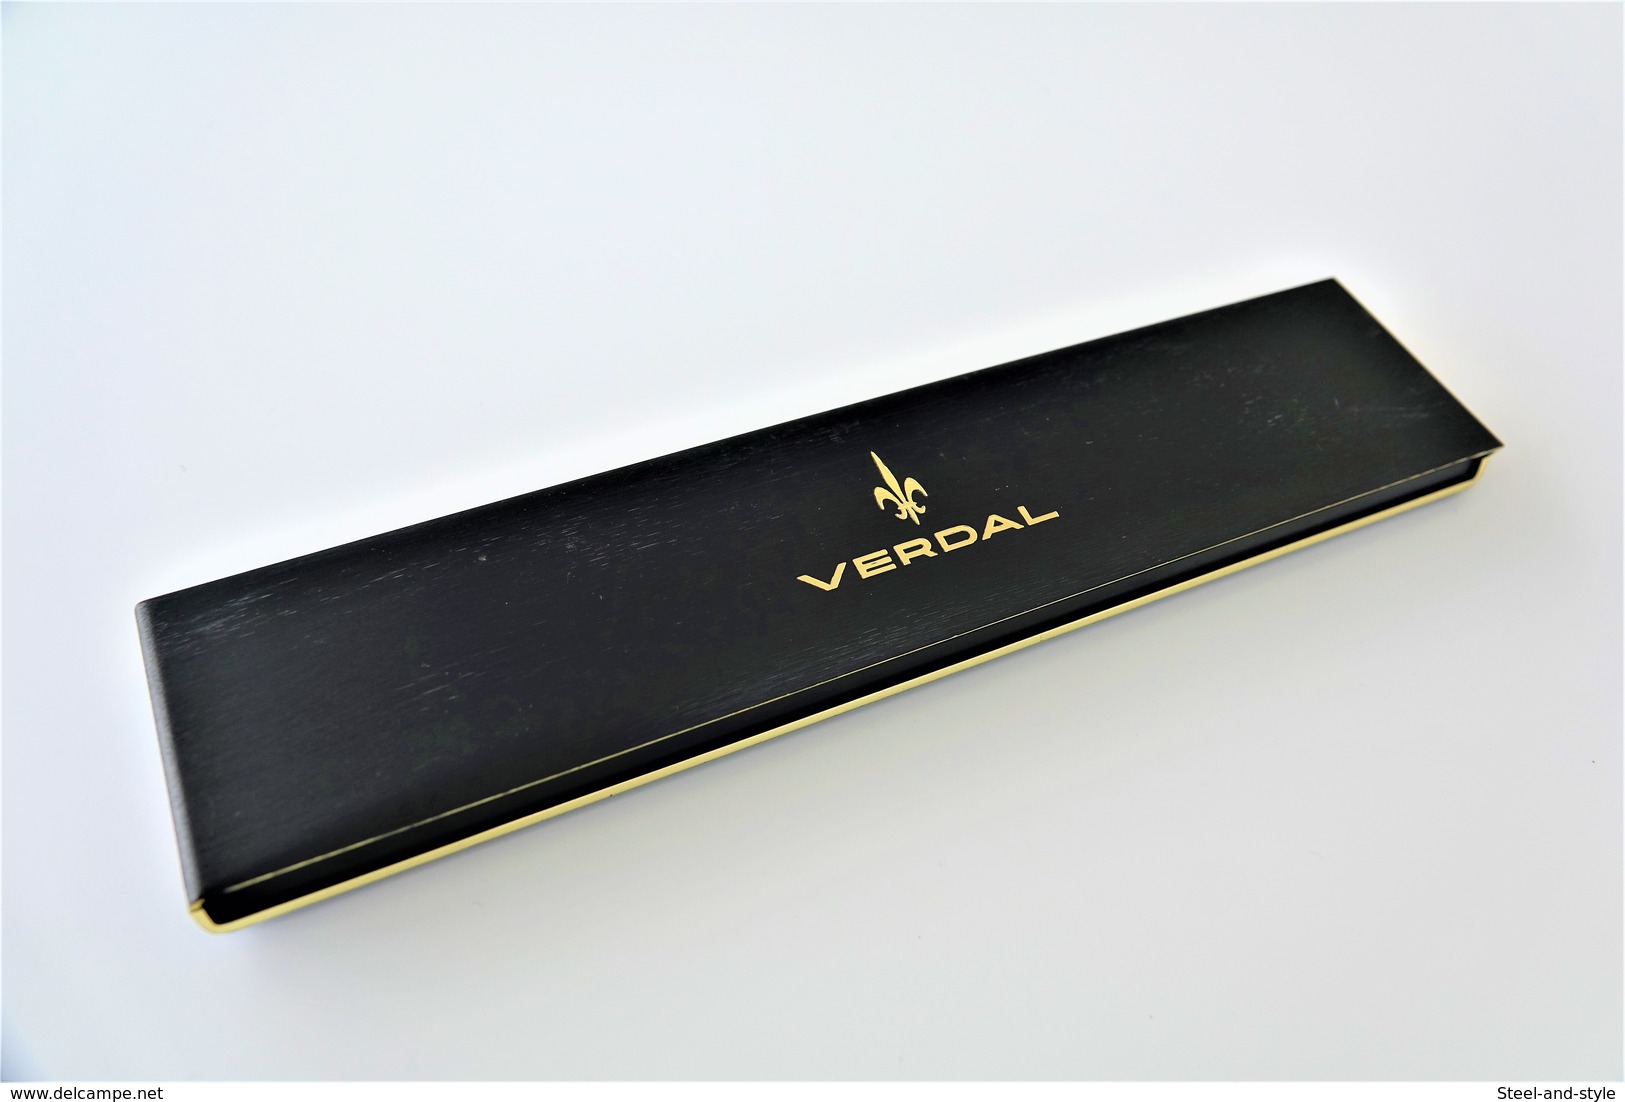 Watches : VERDAL TIME-DATE AUTOMATIC RaRe With Original Box - 20 Microns Gold Plated - Original - Running - 1970s - Horloge: Luxe